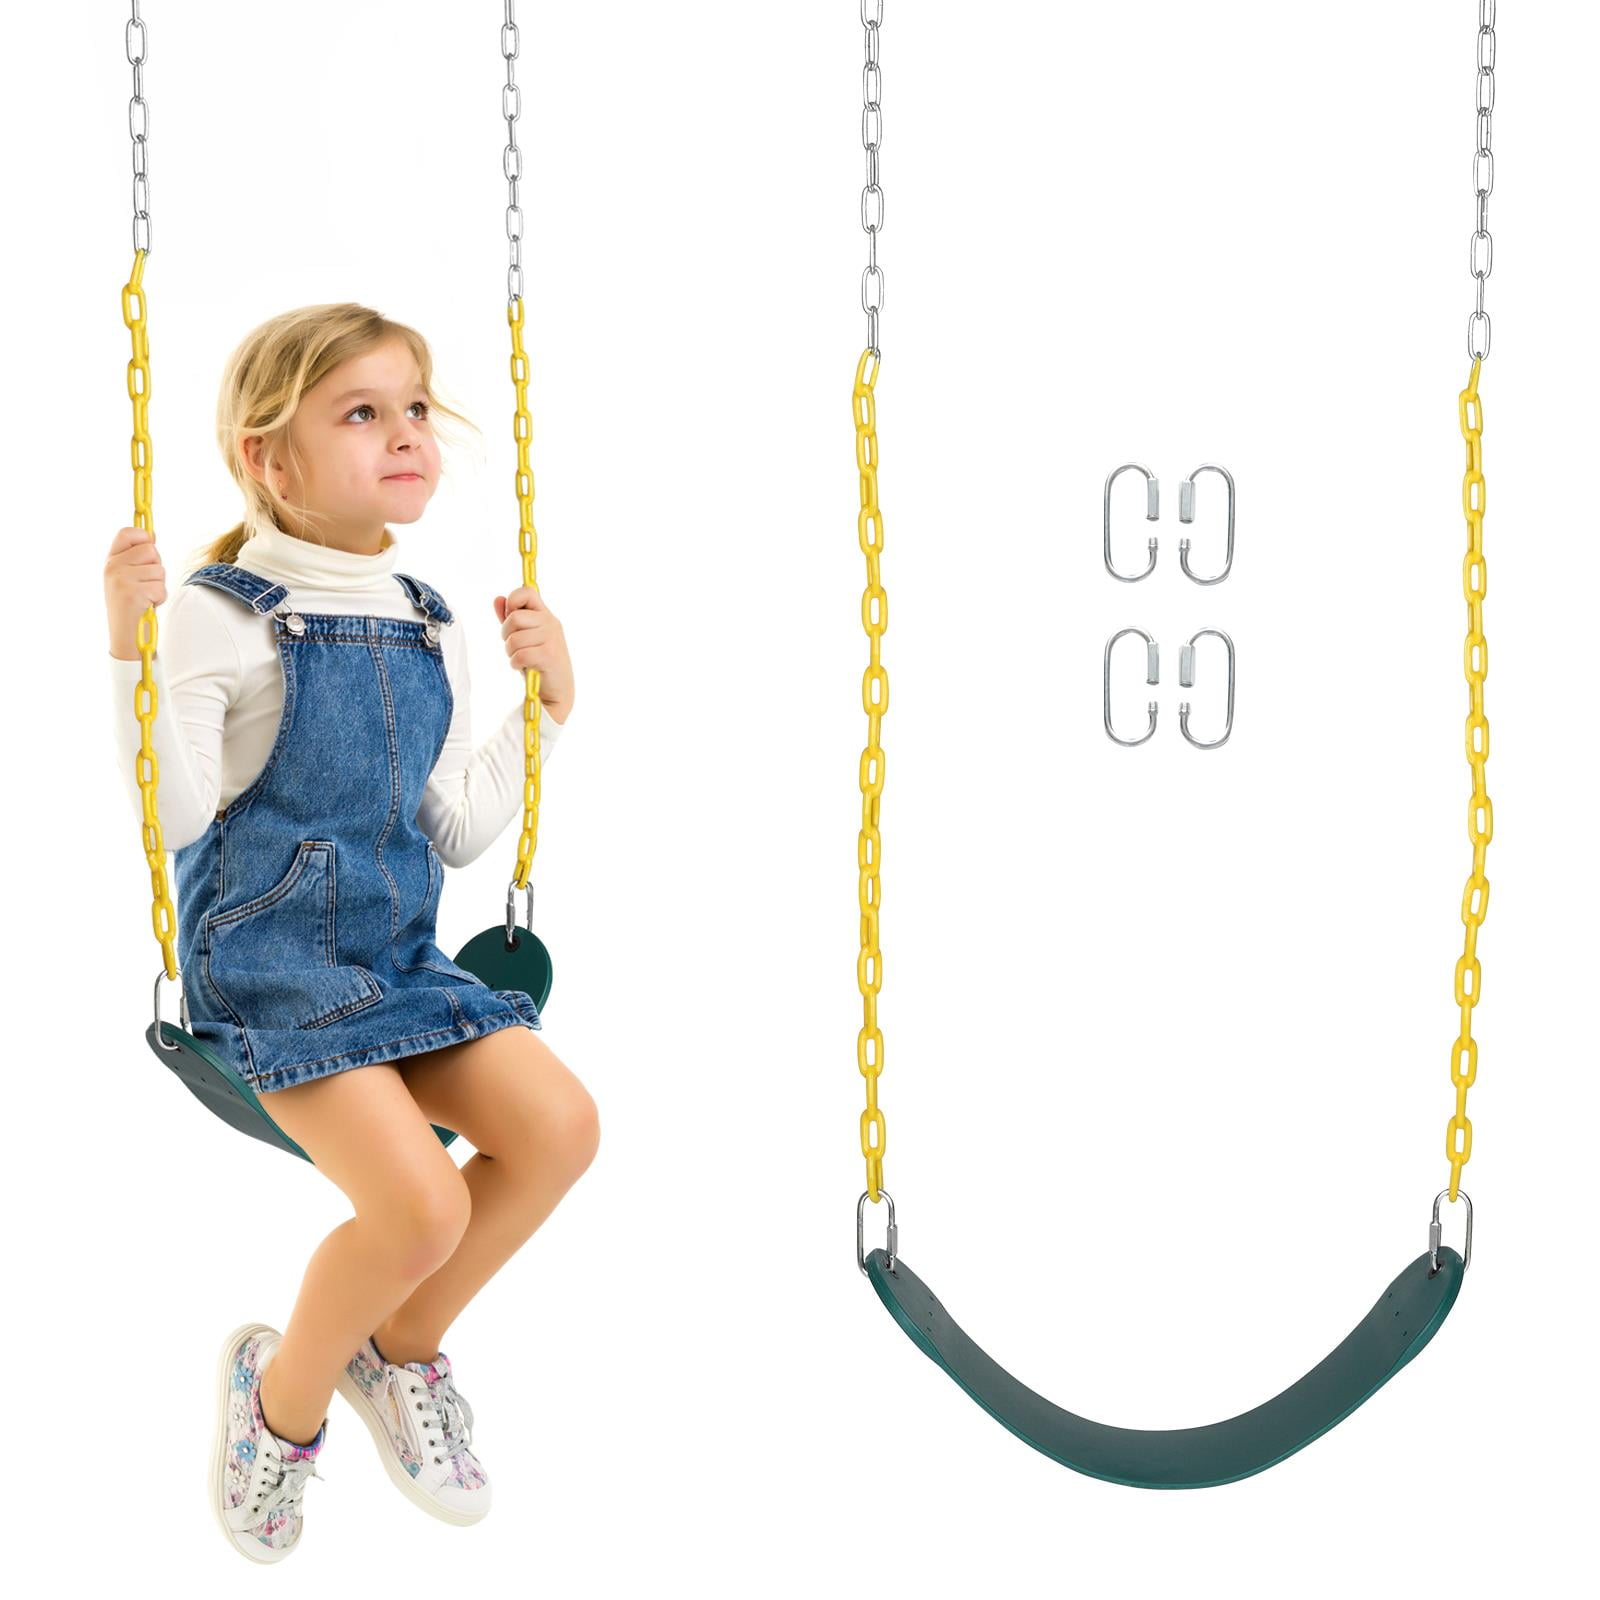 Swing Seat Heavy Duty Swing Set Accessories Replacement w/Chain Plastic Coated 